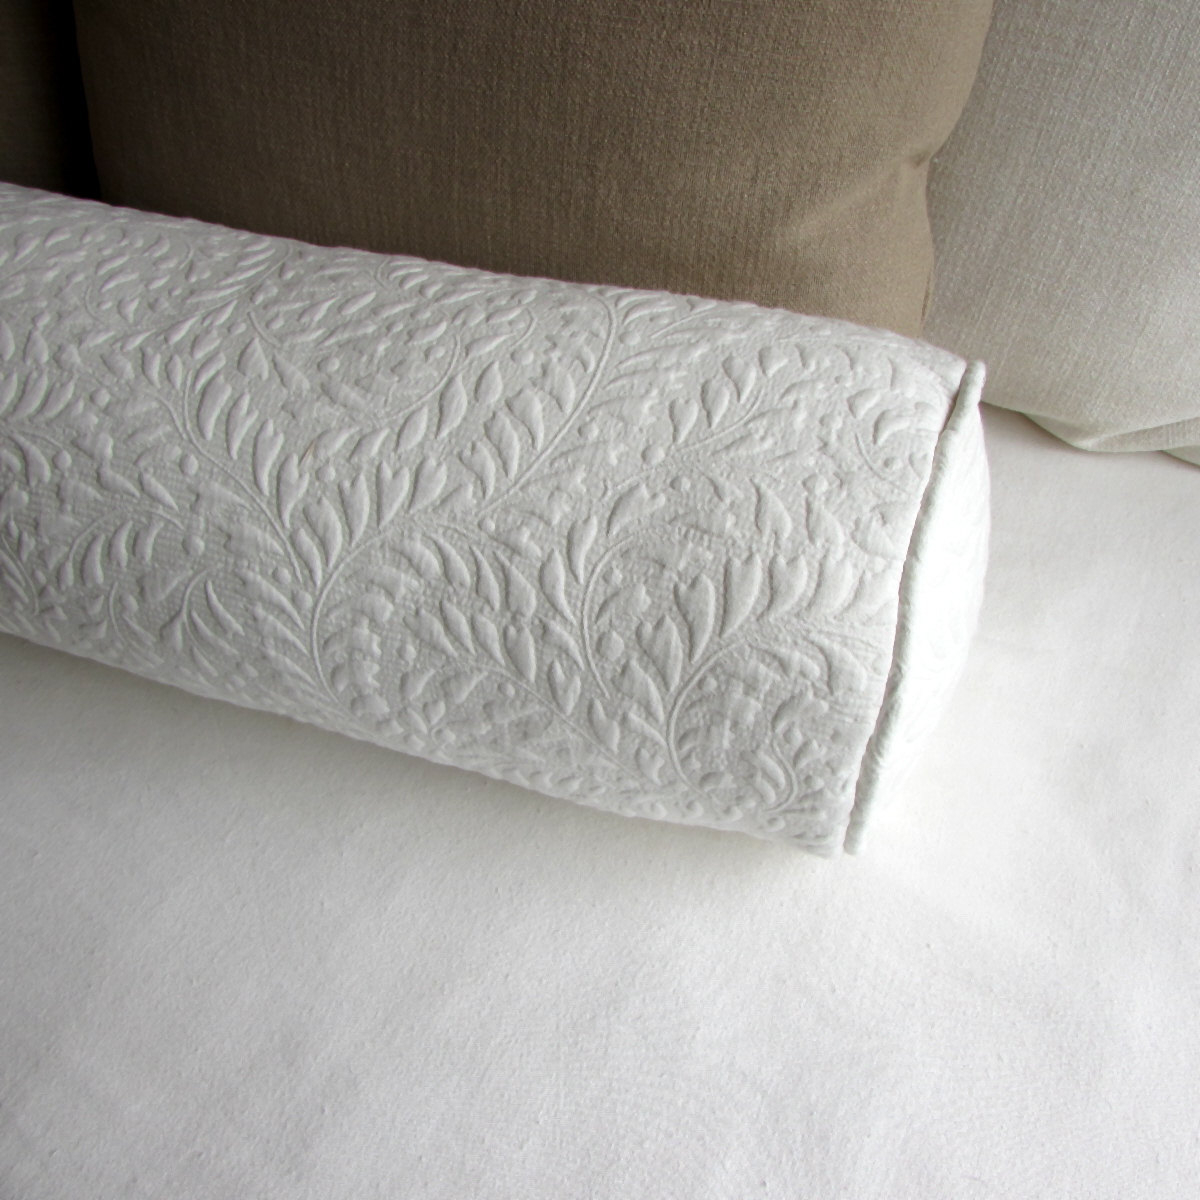 In ivory white daybed si ze 8x30 bolster pillow includes